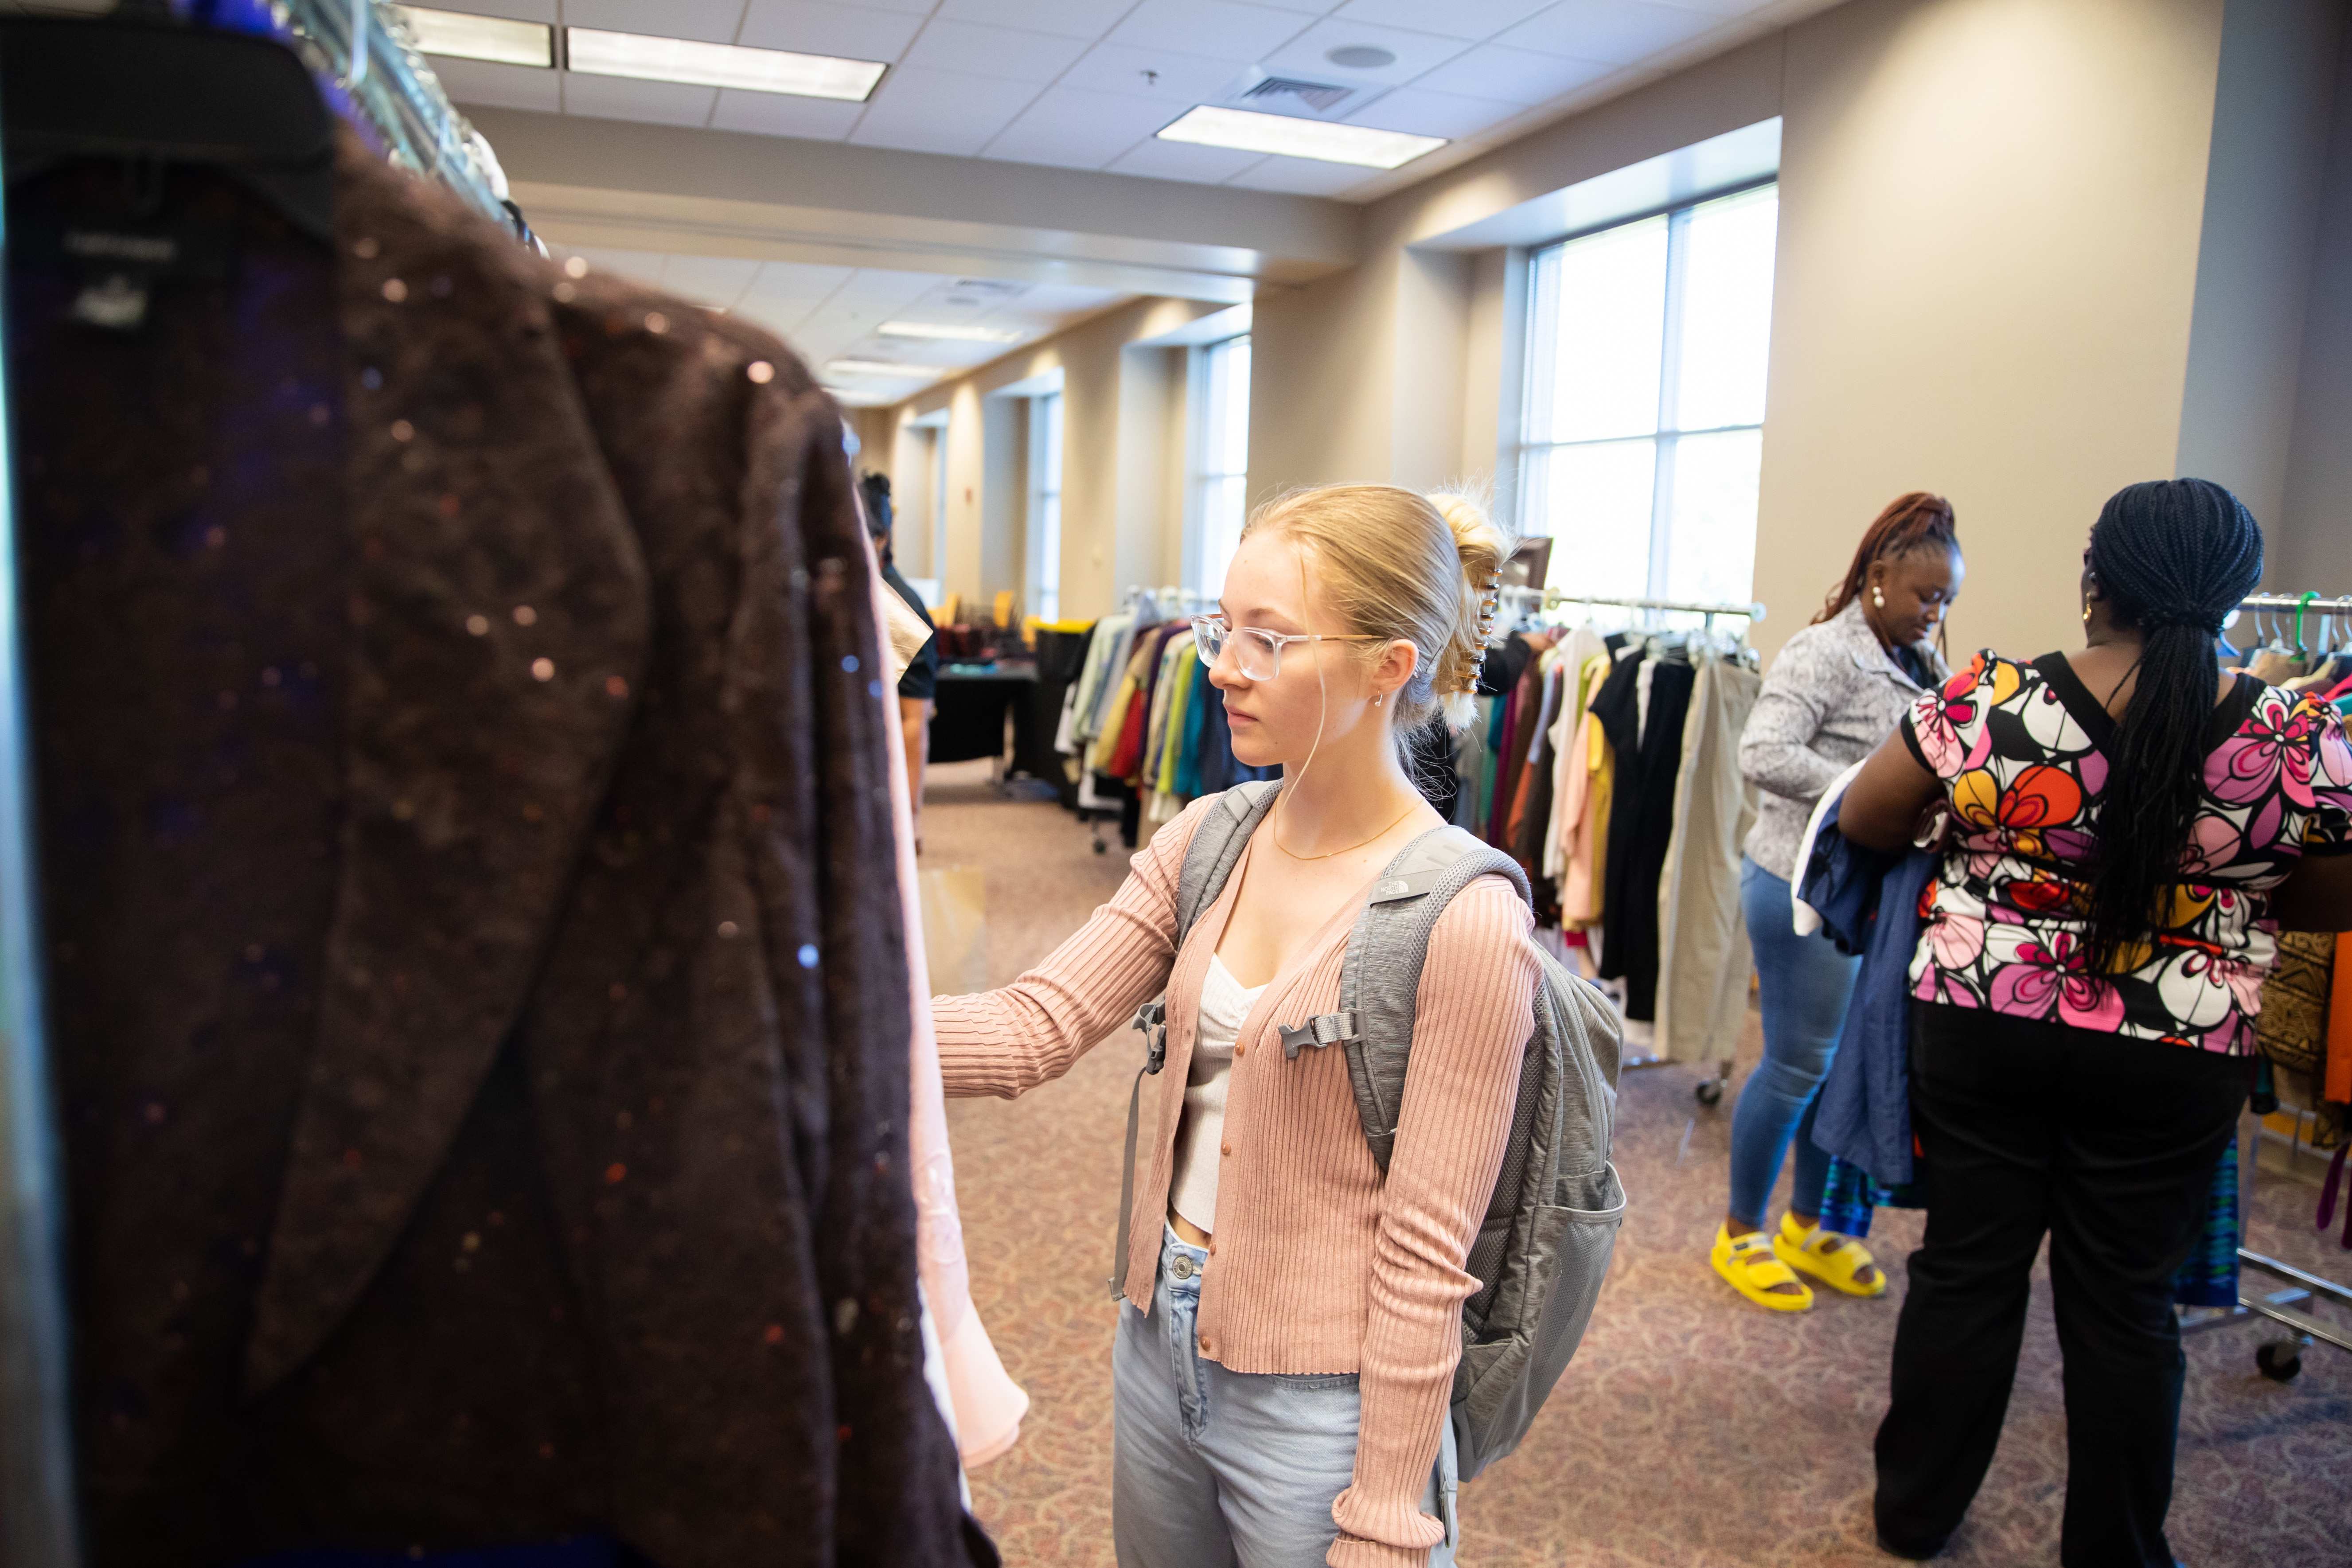     Students, staff and faculty browsed through Bella’s Closet on Tuesday, Sept. 13, which provided free professional wear for all visitors.  Madison Casey | Student Photographer 